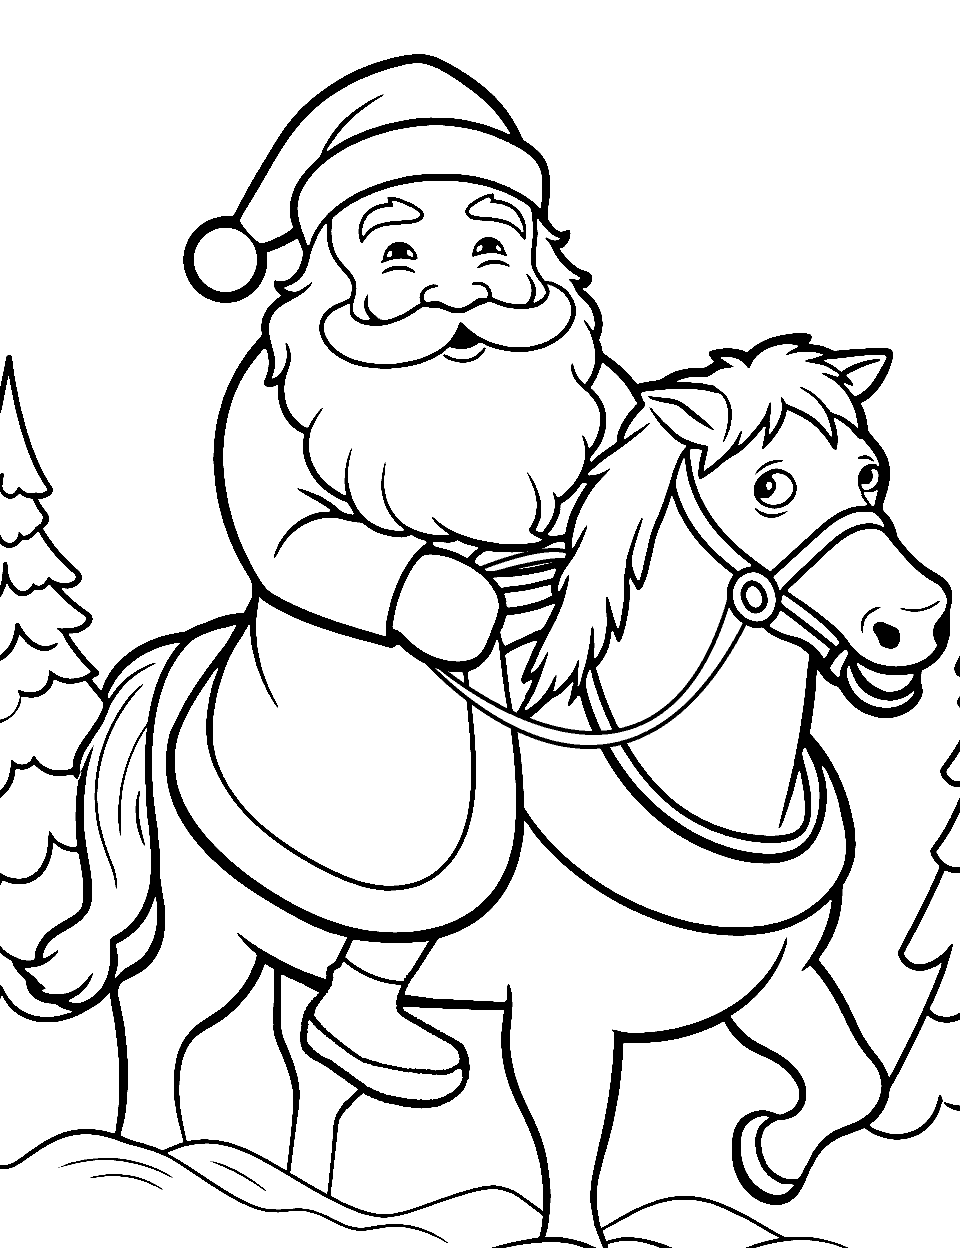 Learn to draw a santa claus drawing so easy for beginners